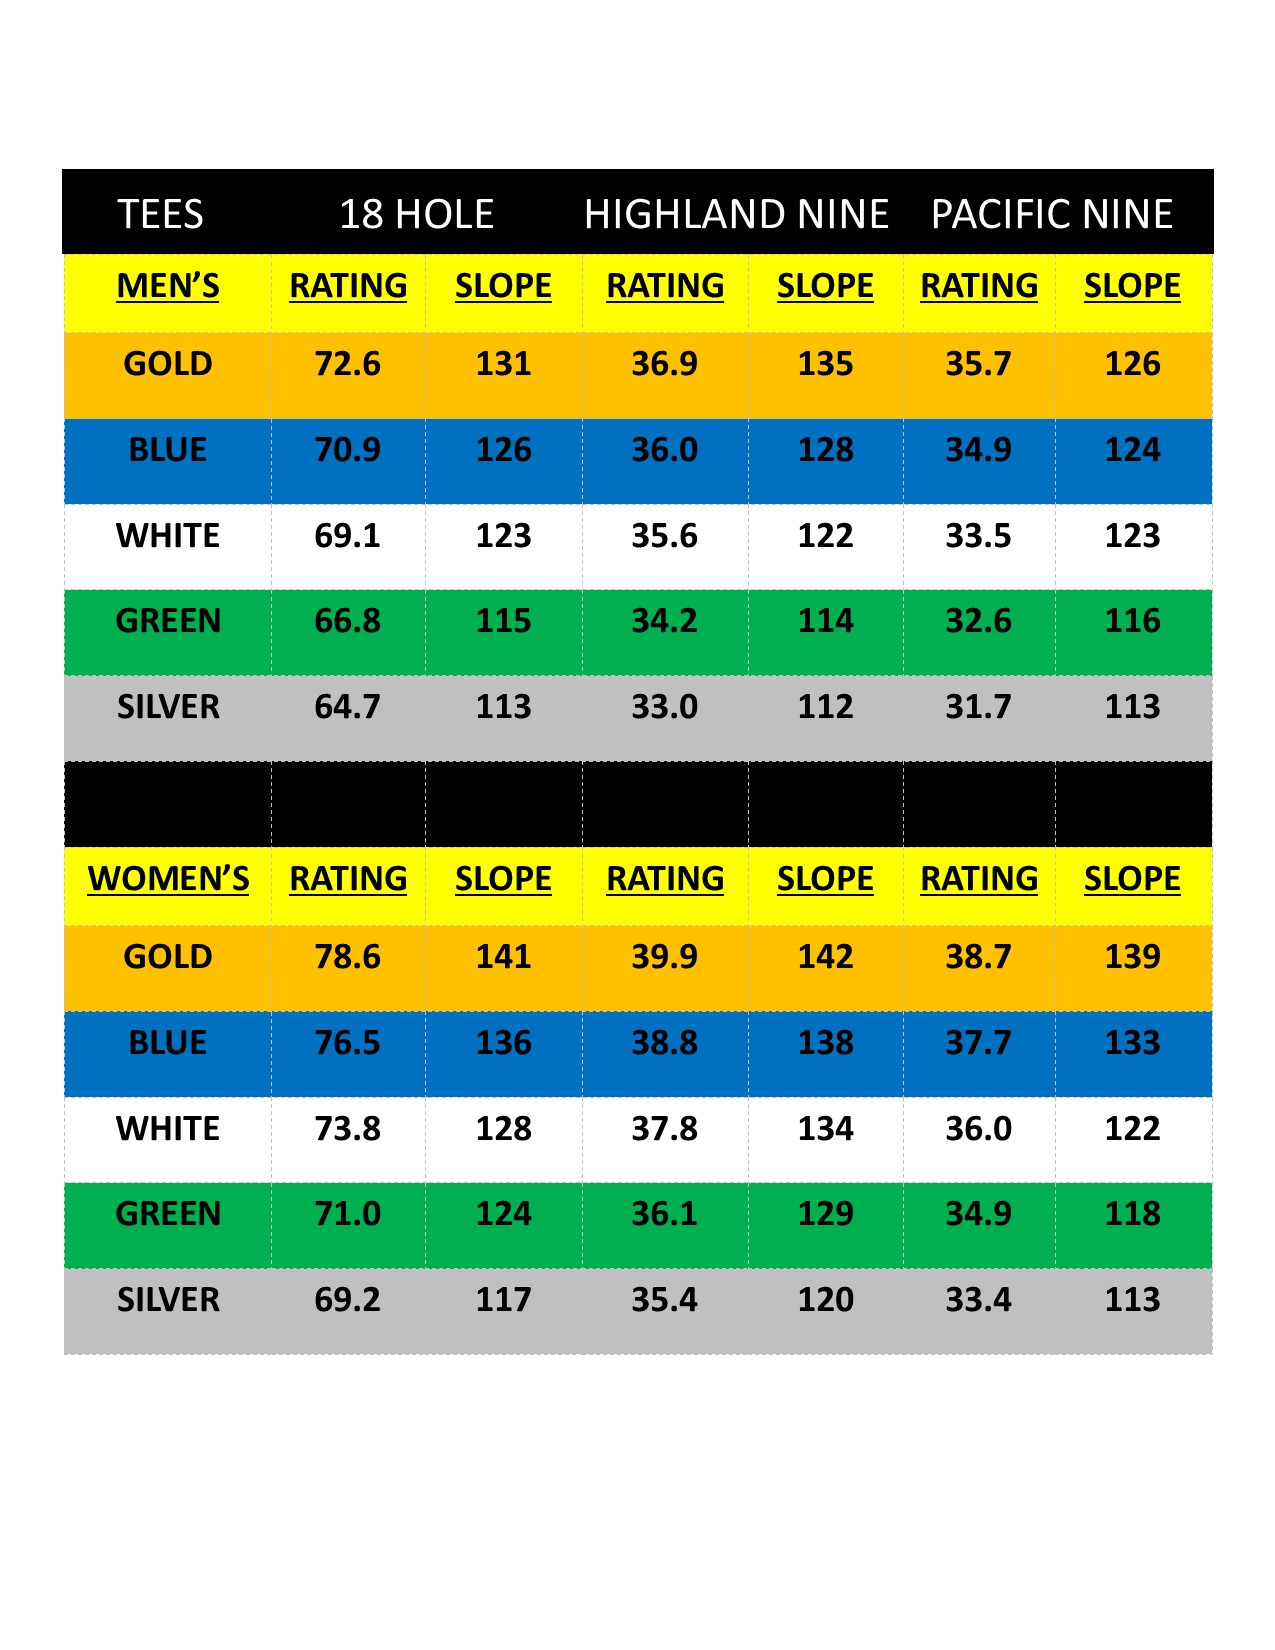 Highland Pacific Golf Slope Rating